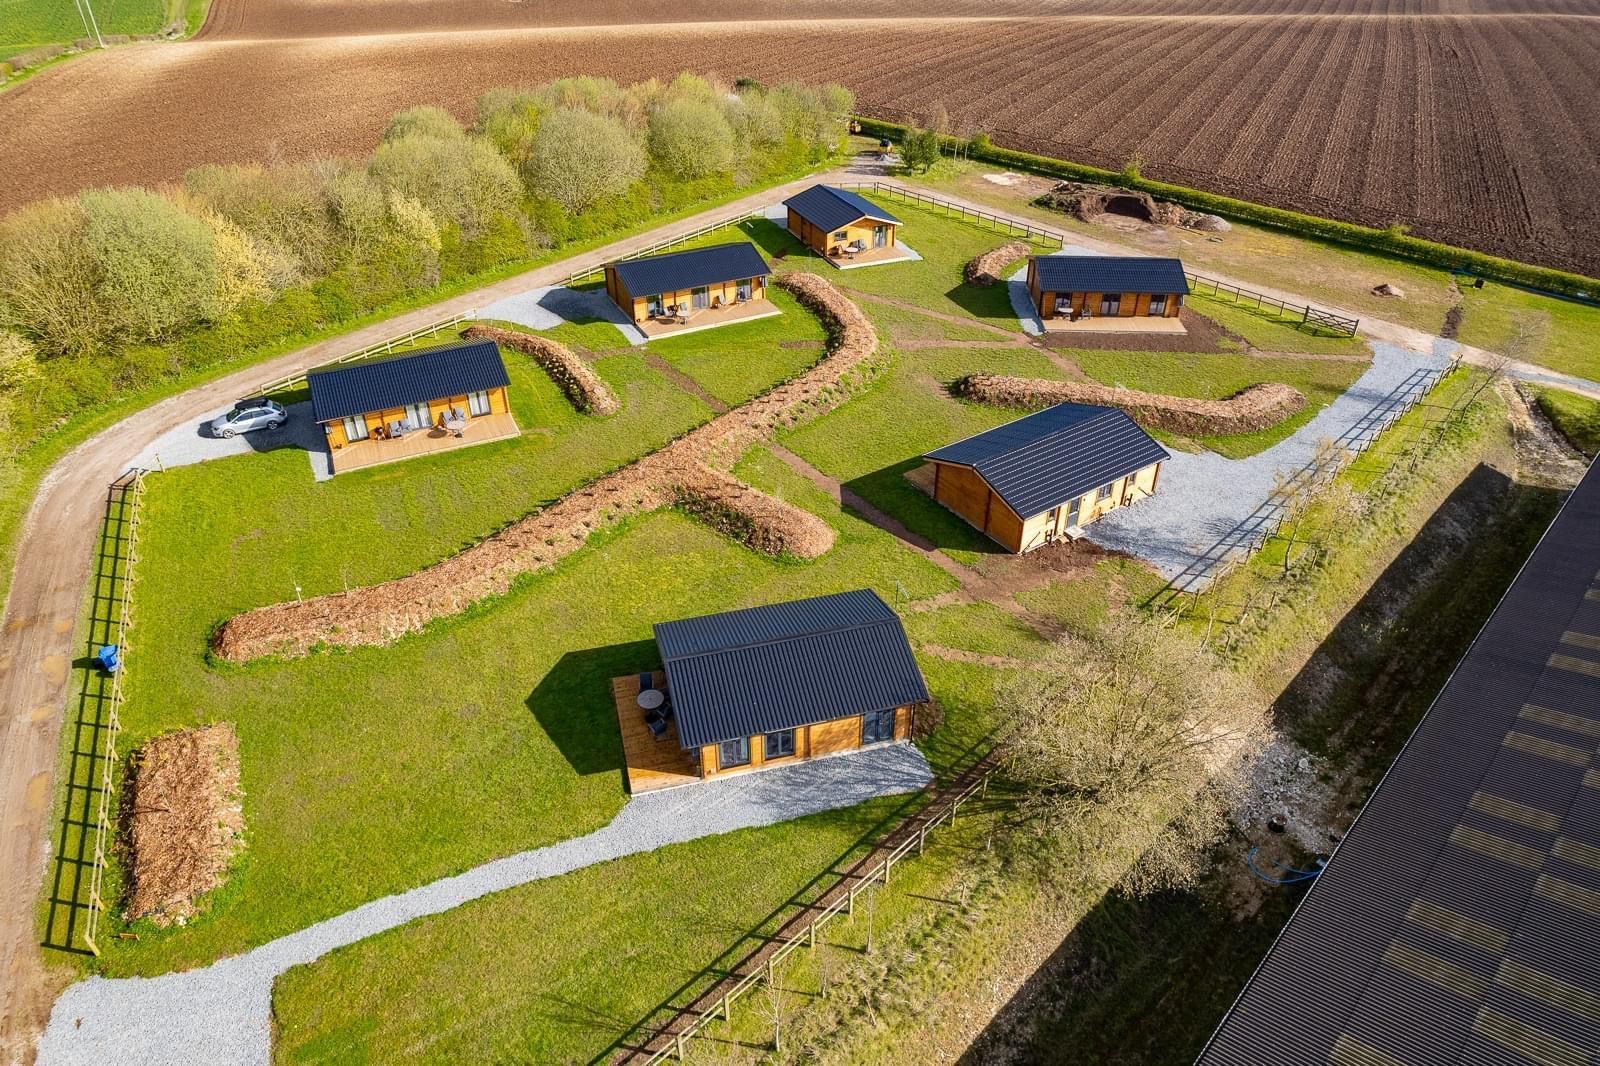 6 Stunning 2 Bedroom Lodges built by Northern Log Cabins